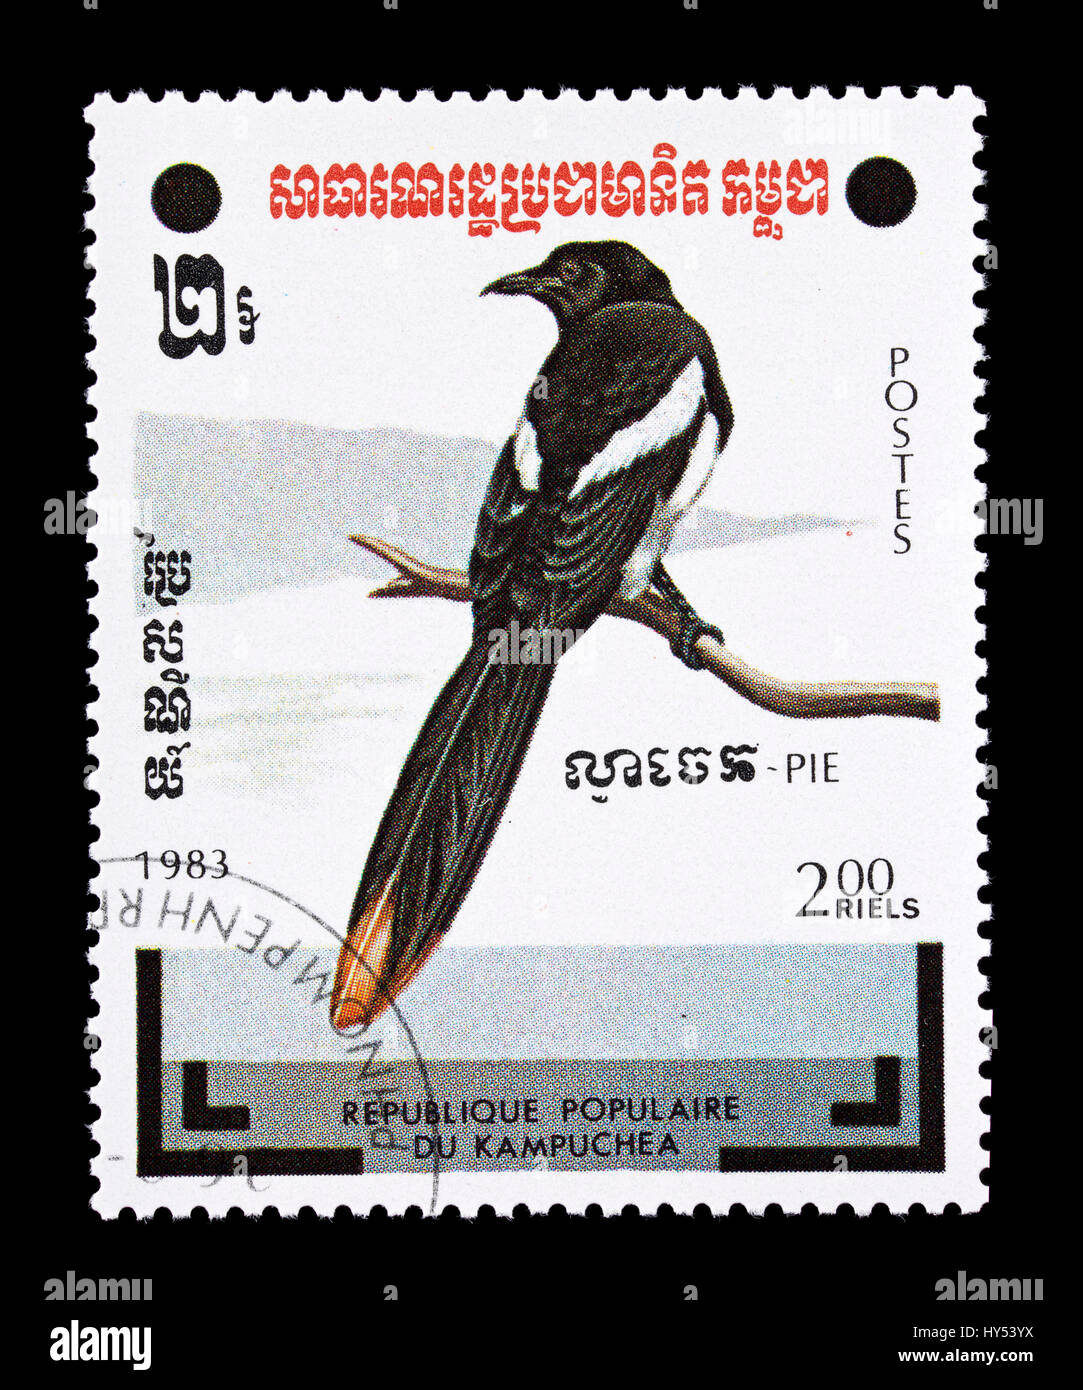 Postage stamp from Cambodia depicting a magpie. Stock Photo